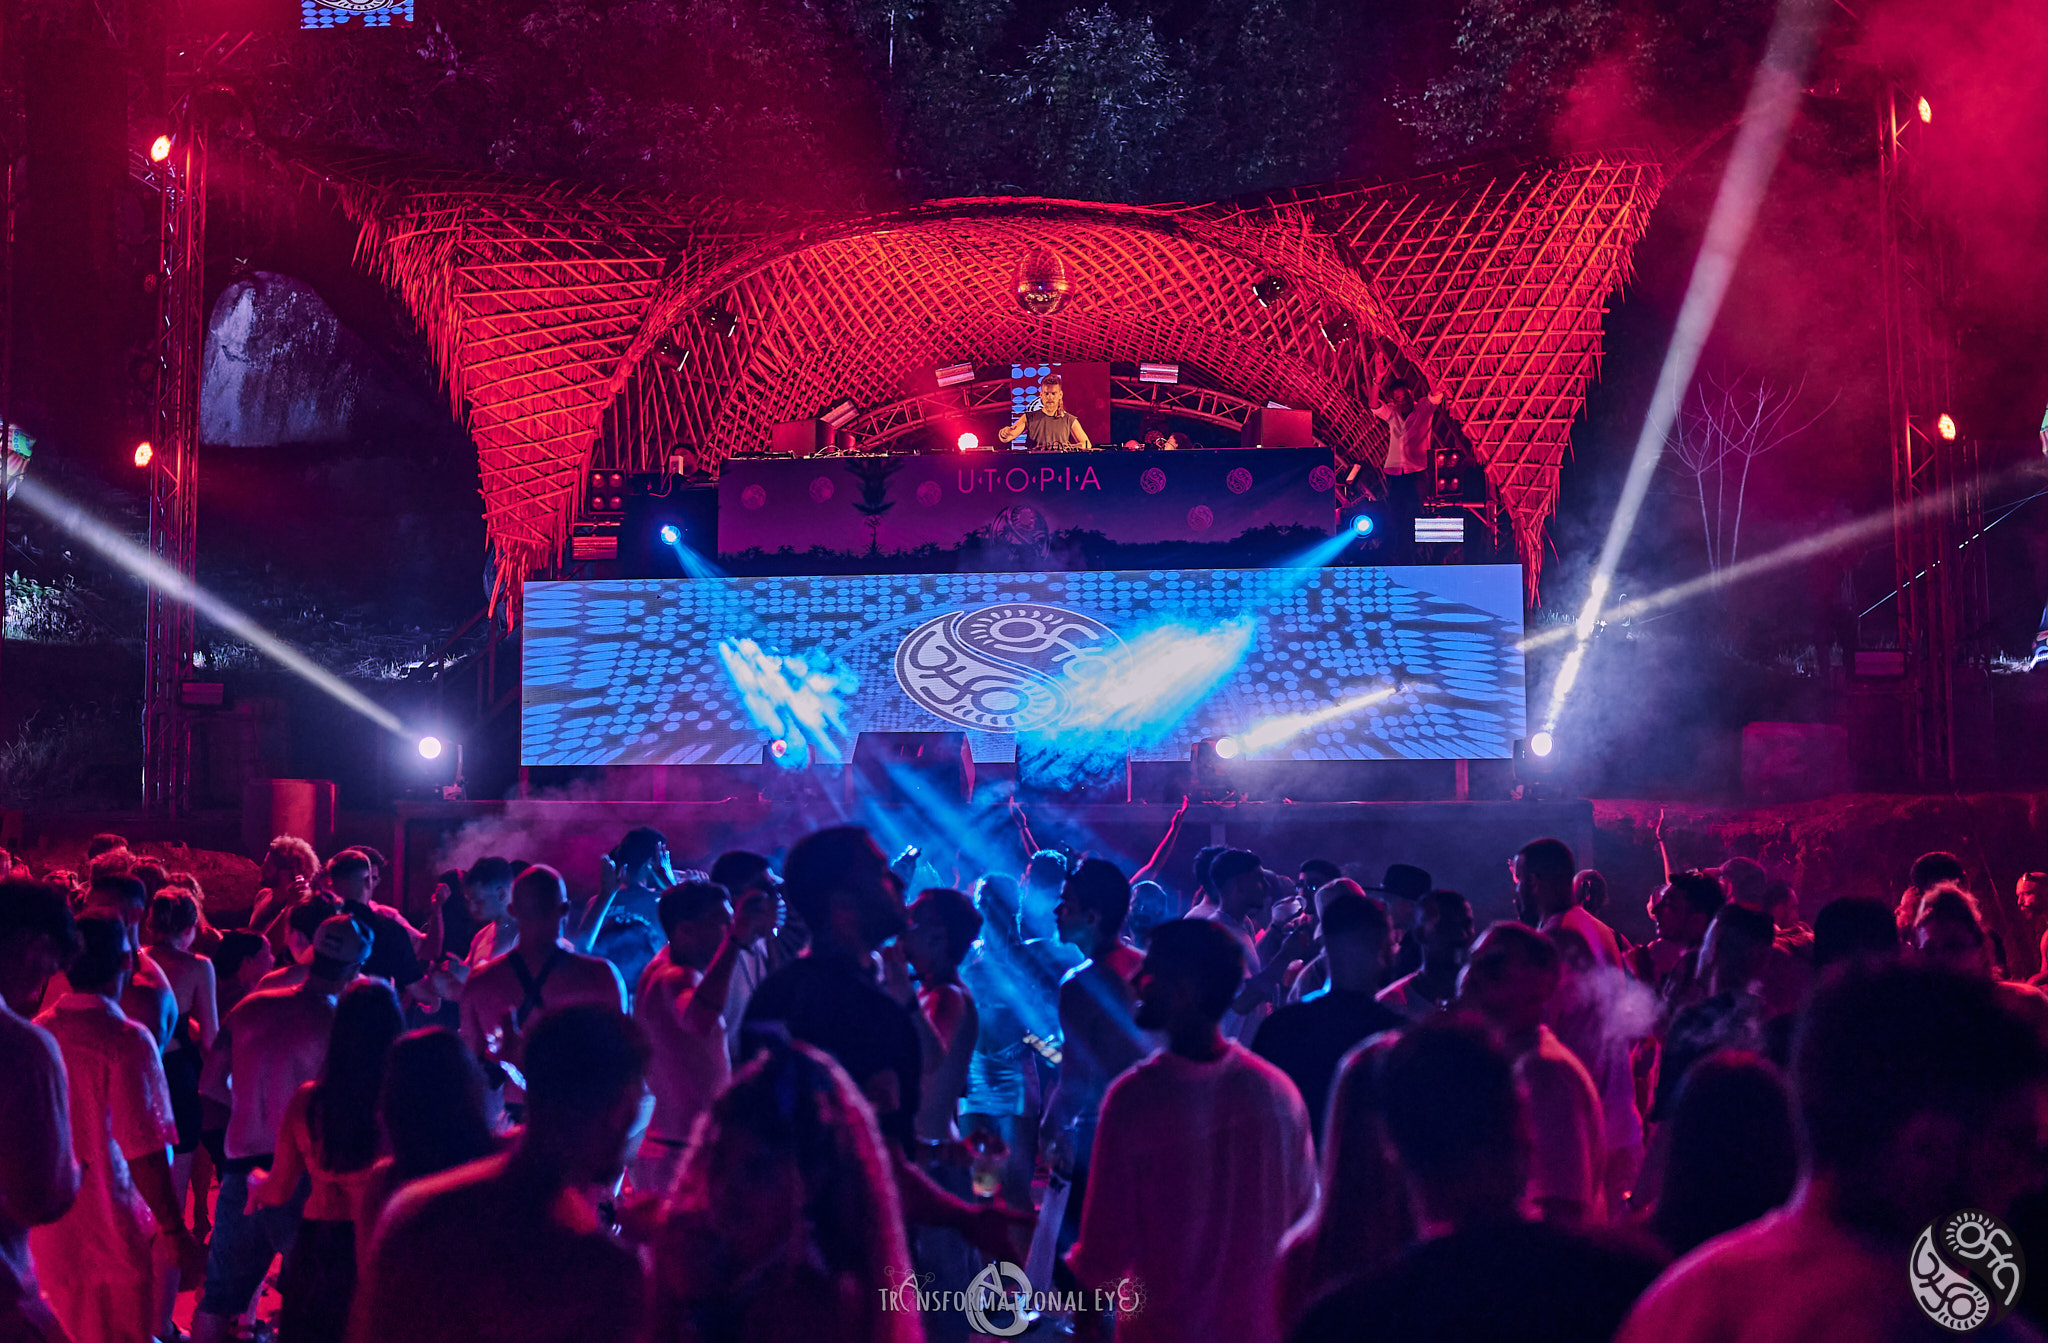 http://amirweiss.com/ For Hi-Res and Print Purchases - Instagram: @awtransform & @awfireflow 2024 © Amir Weiss#Festivals - #Artists - #dj - #Communities - #DigitalNomad - #flowarts -  #visionaryArtists